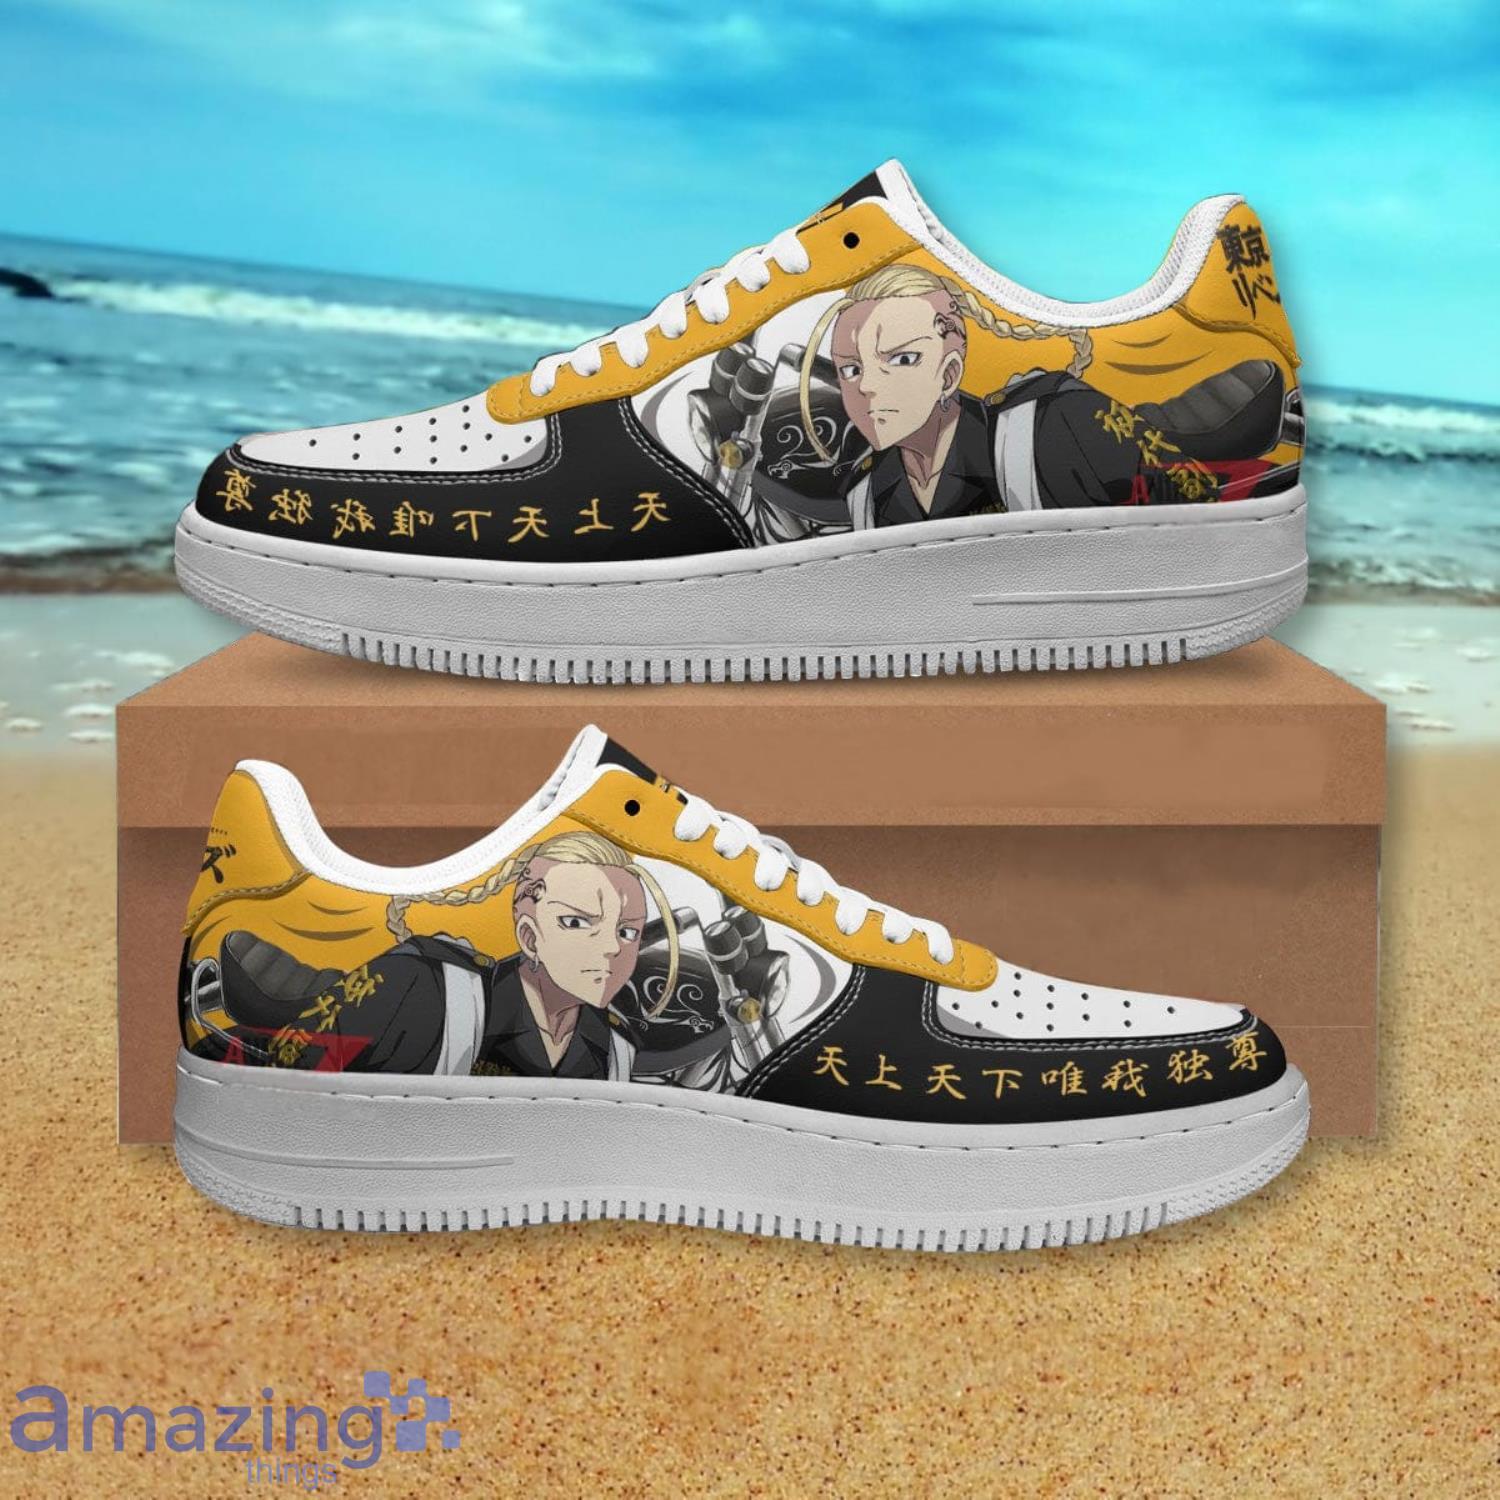 Tokyo Revengers Draken Air Force Shoes Gift For Animes Fans Product Photo 1